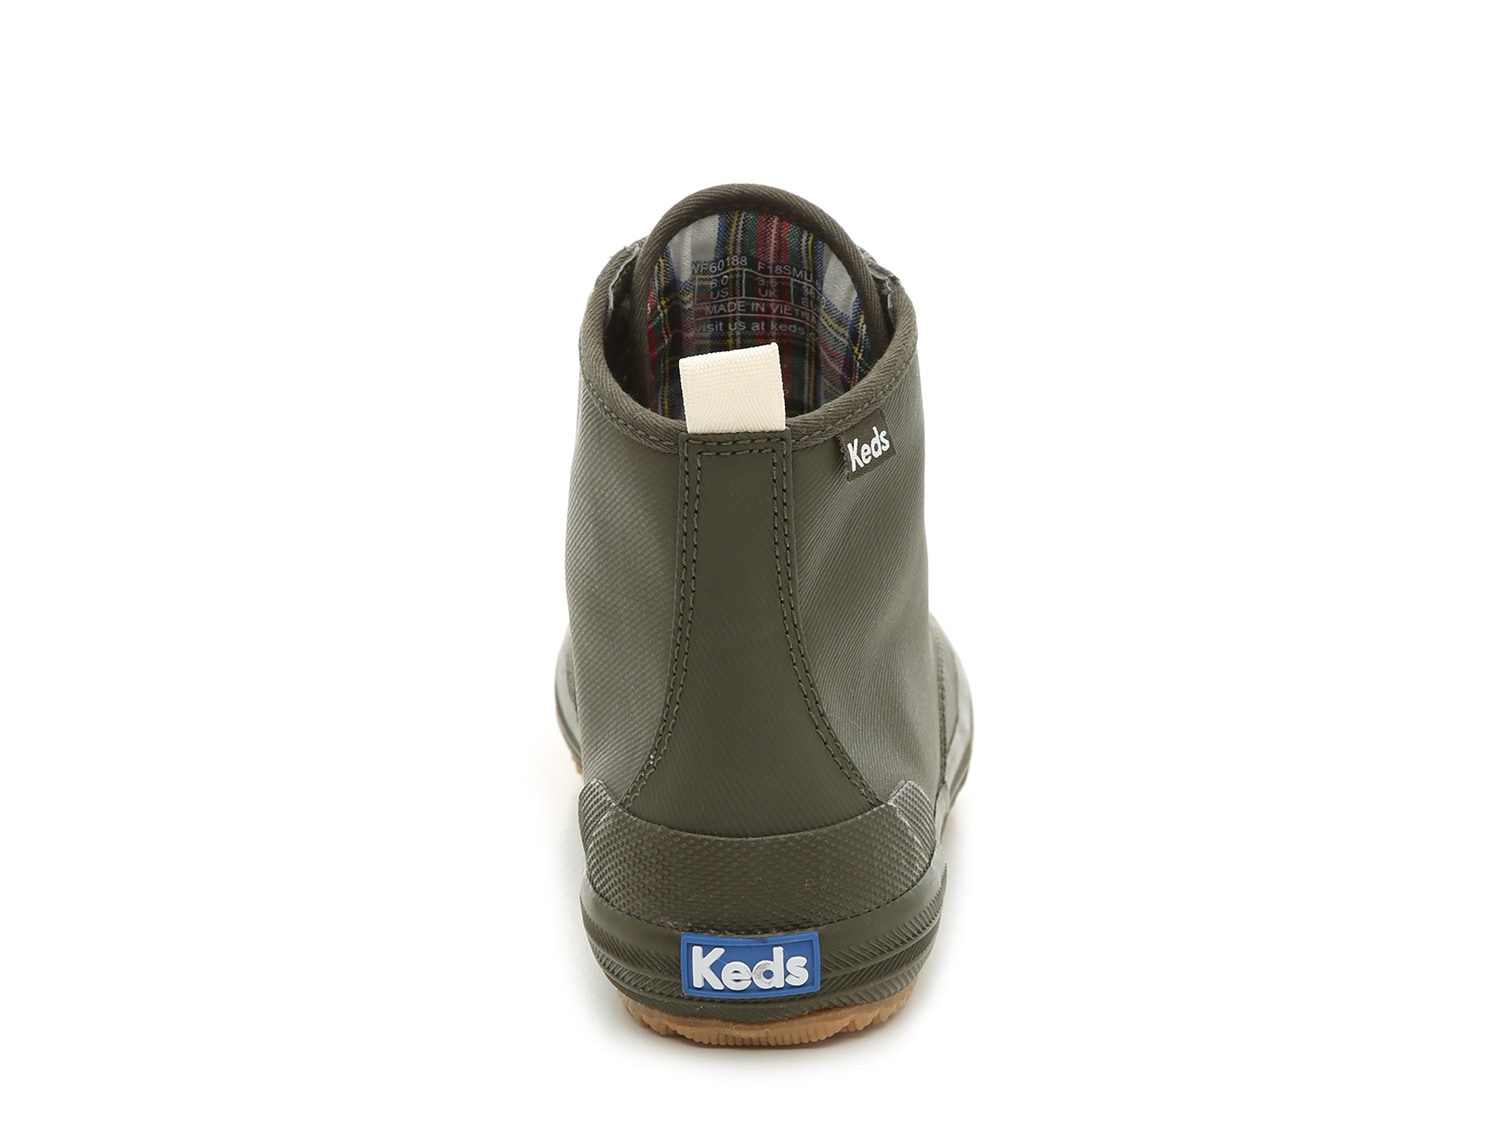 keds scout duck boot